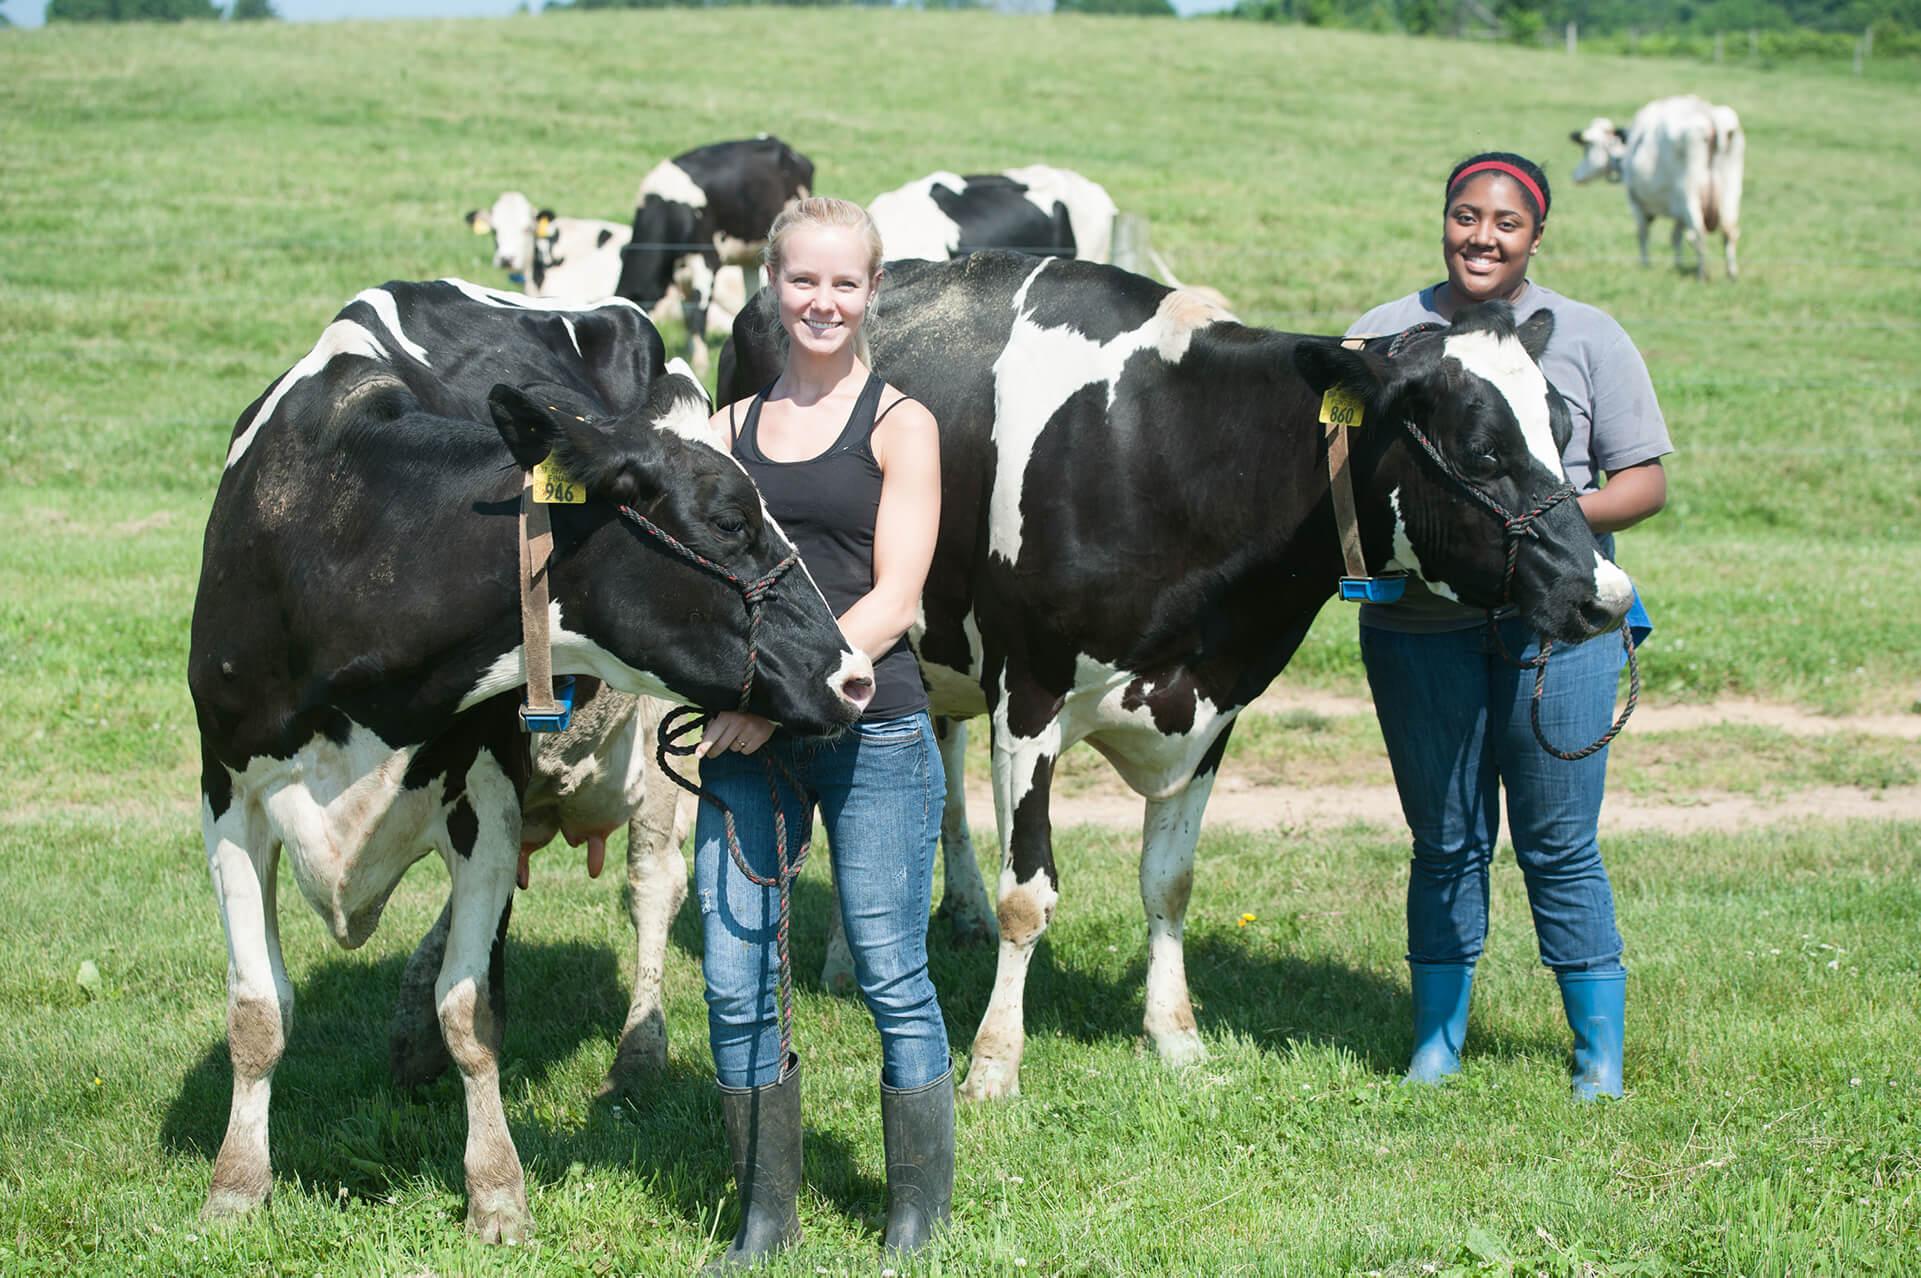 Two researchers standing with dairy cows, posing for the photo